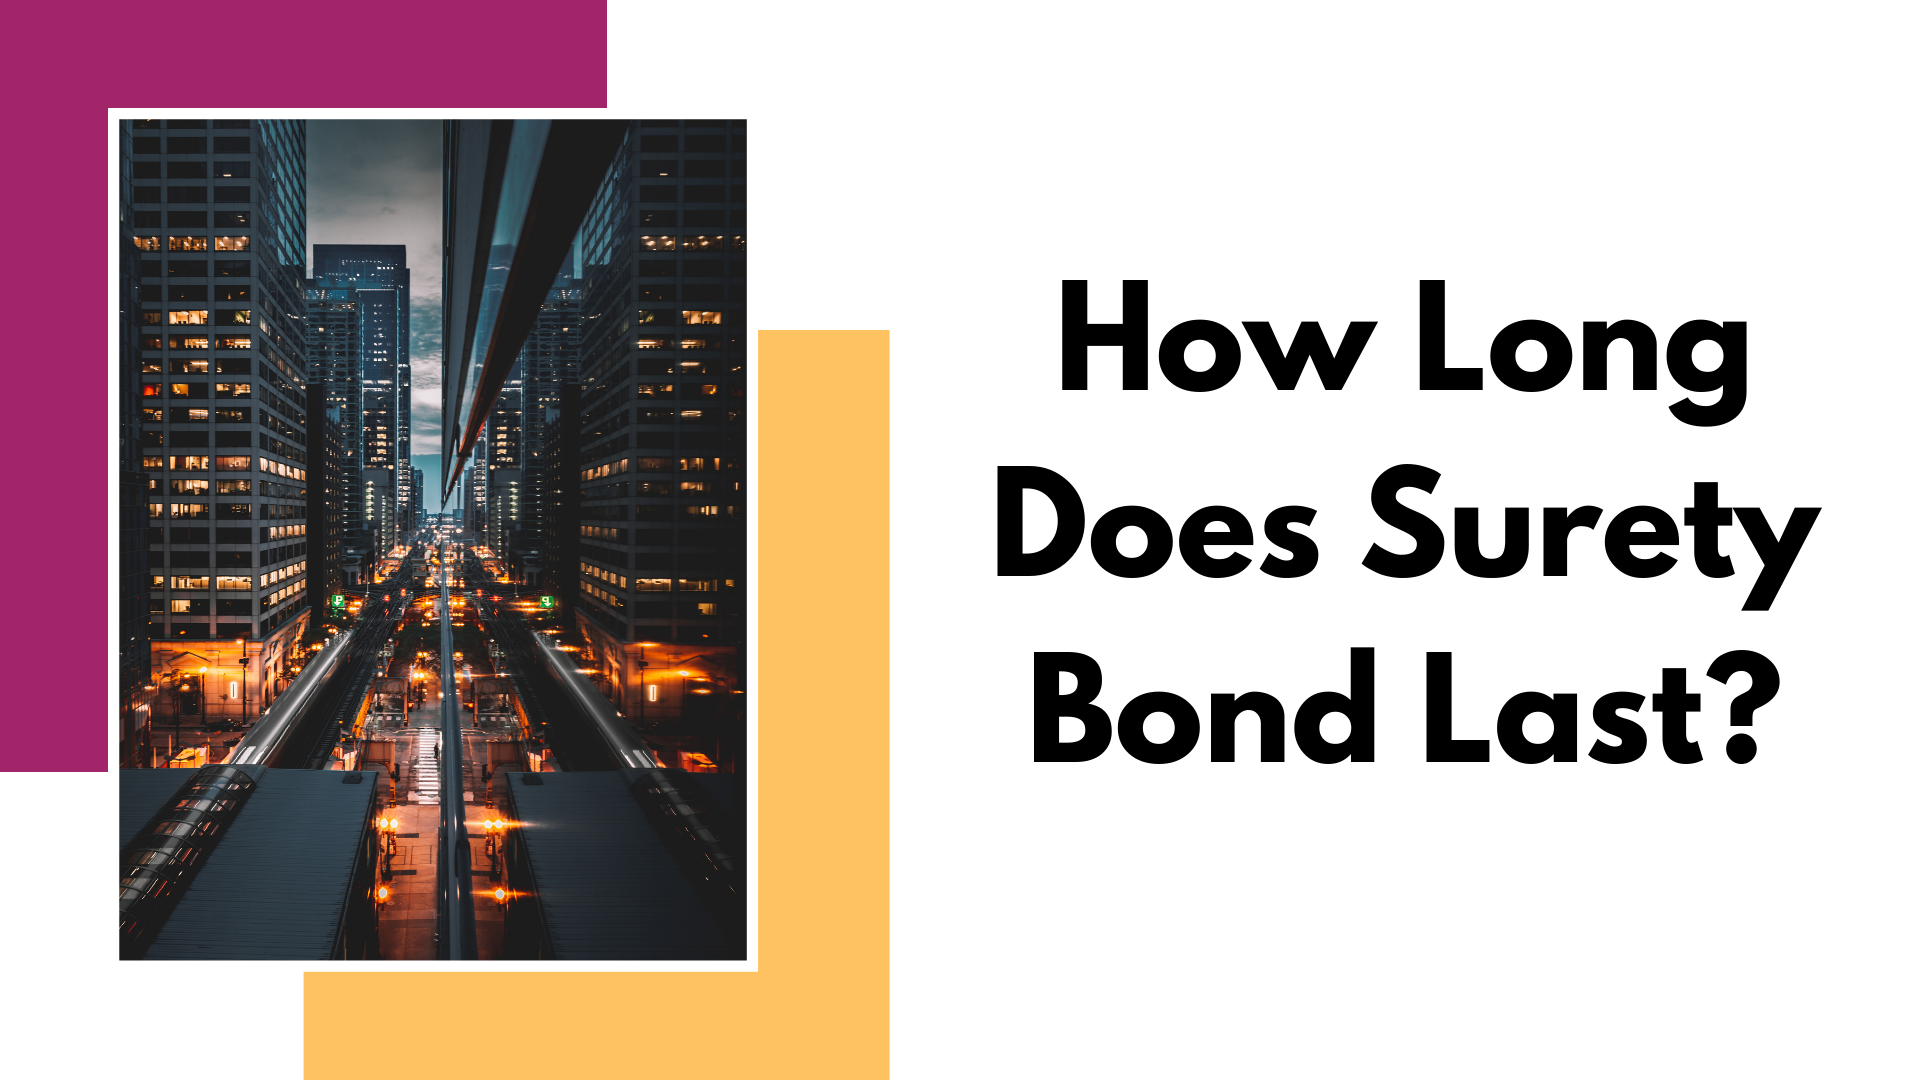 surety bond - What is a surety bond and what does it protect against - city lights